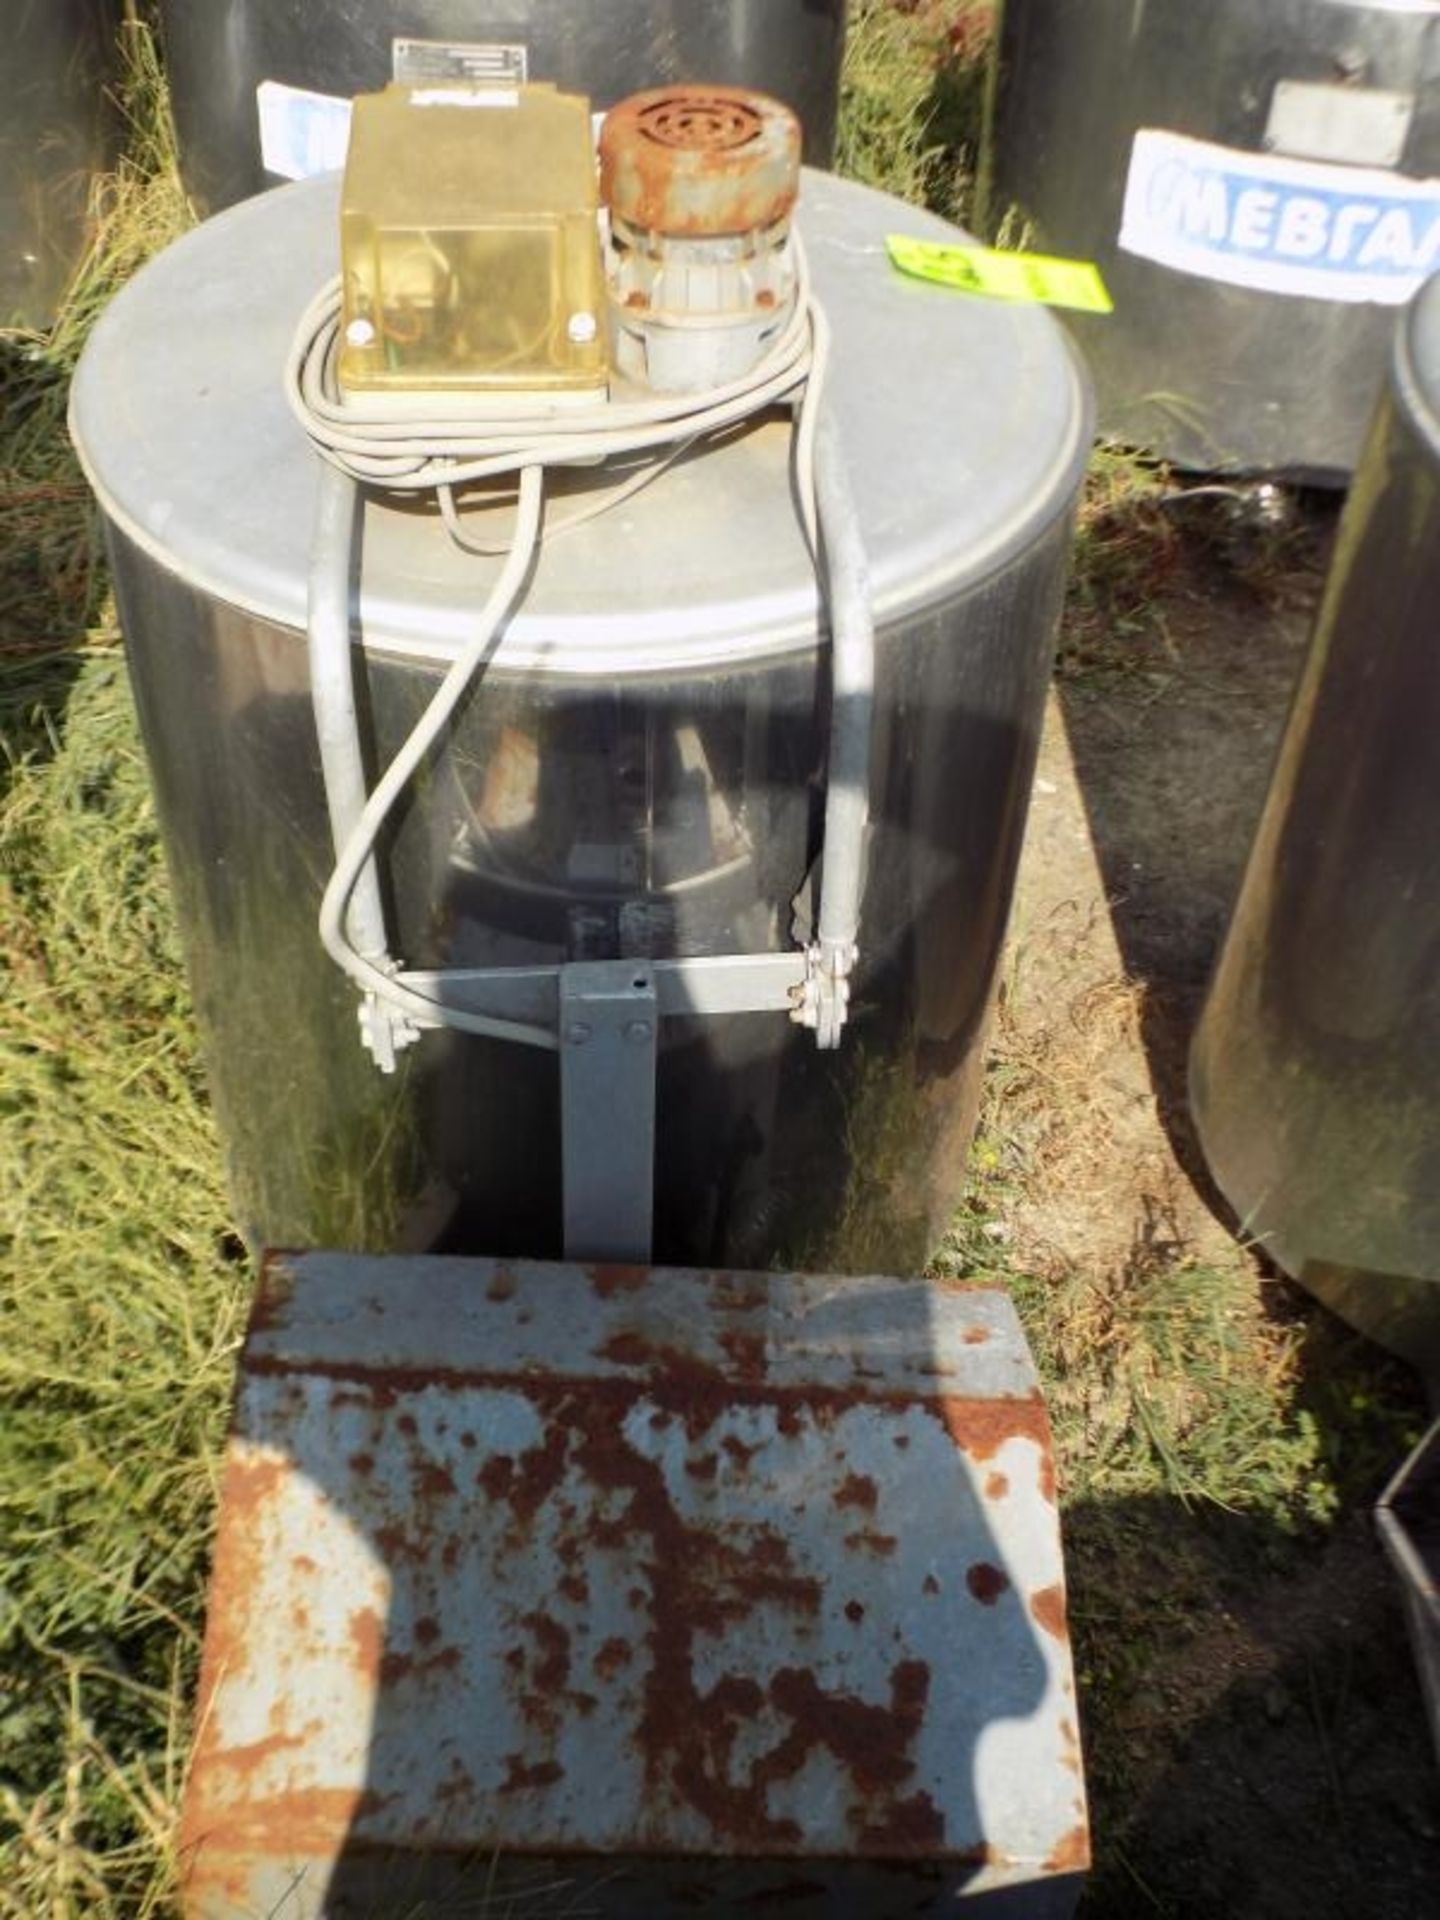 Japy Aprox. 320 L/85 Gal. Jacketed S/S Farm Tank with Hinged Lid, Twin Blade Prop, Motor with - Image 3 of 4